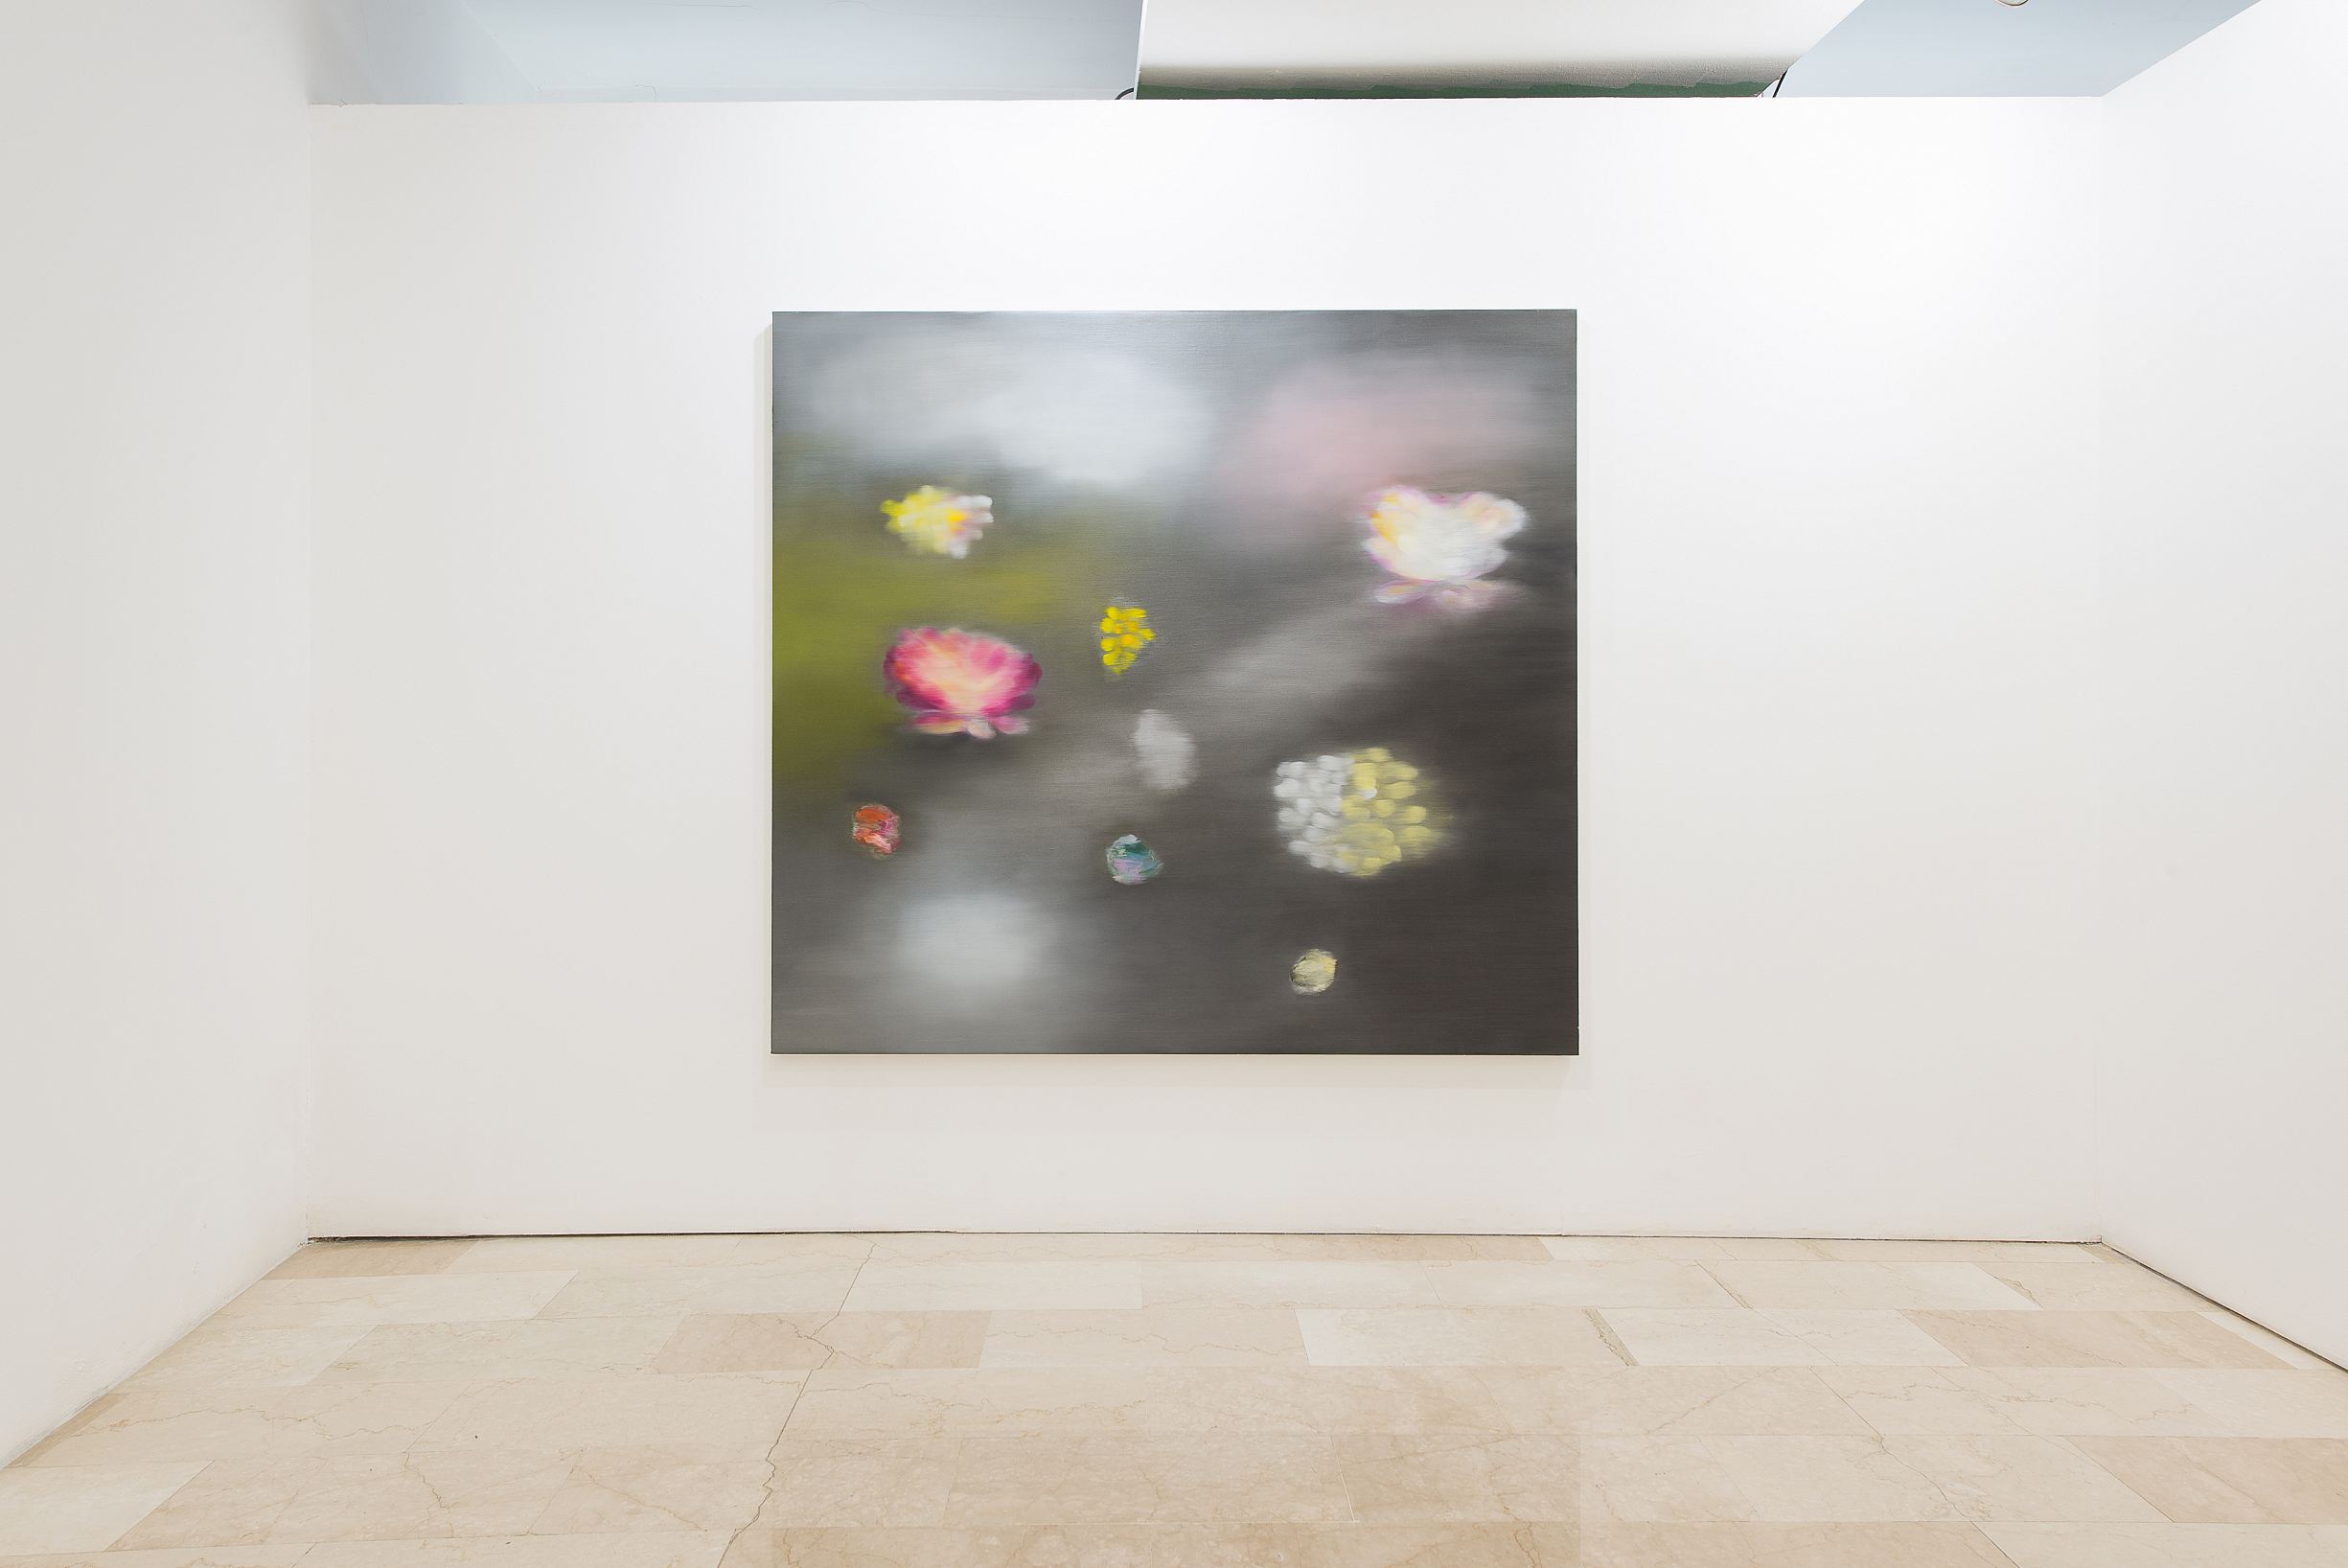 Ross Bleckner / New Paintings - Exhibition at Mazzoli Gallery